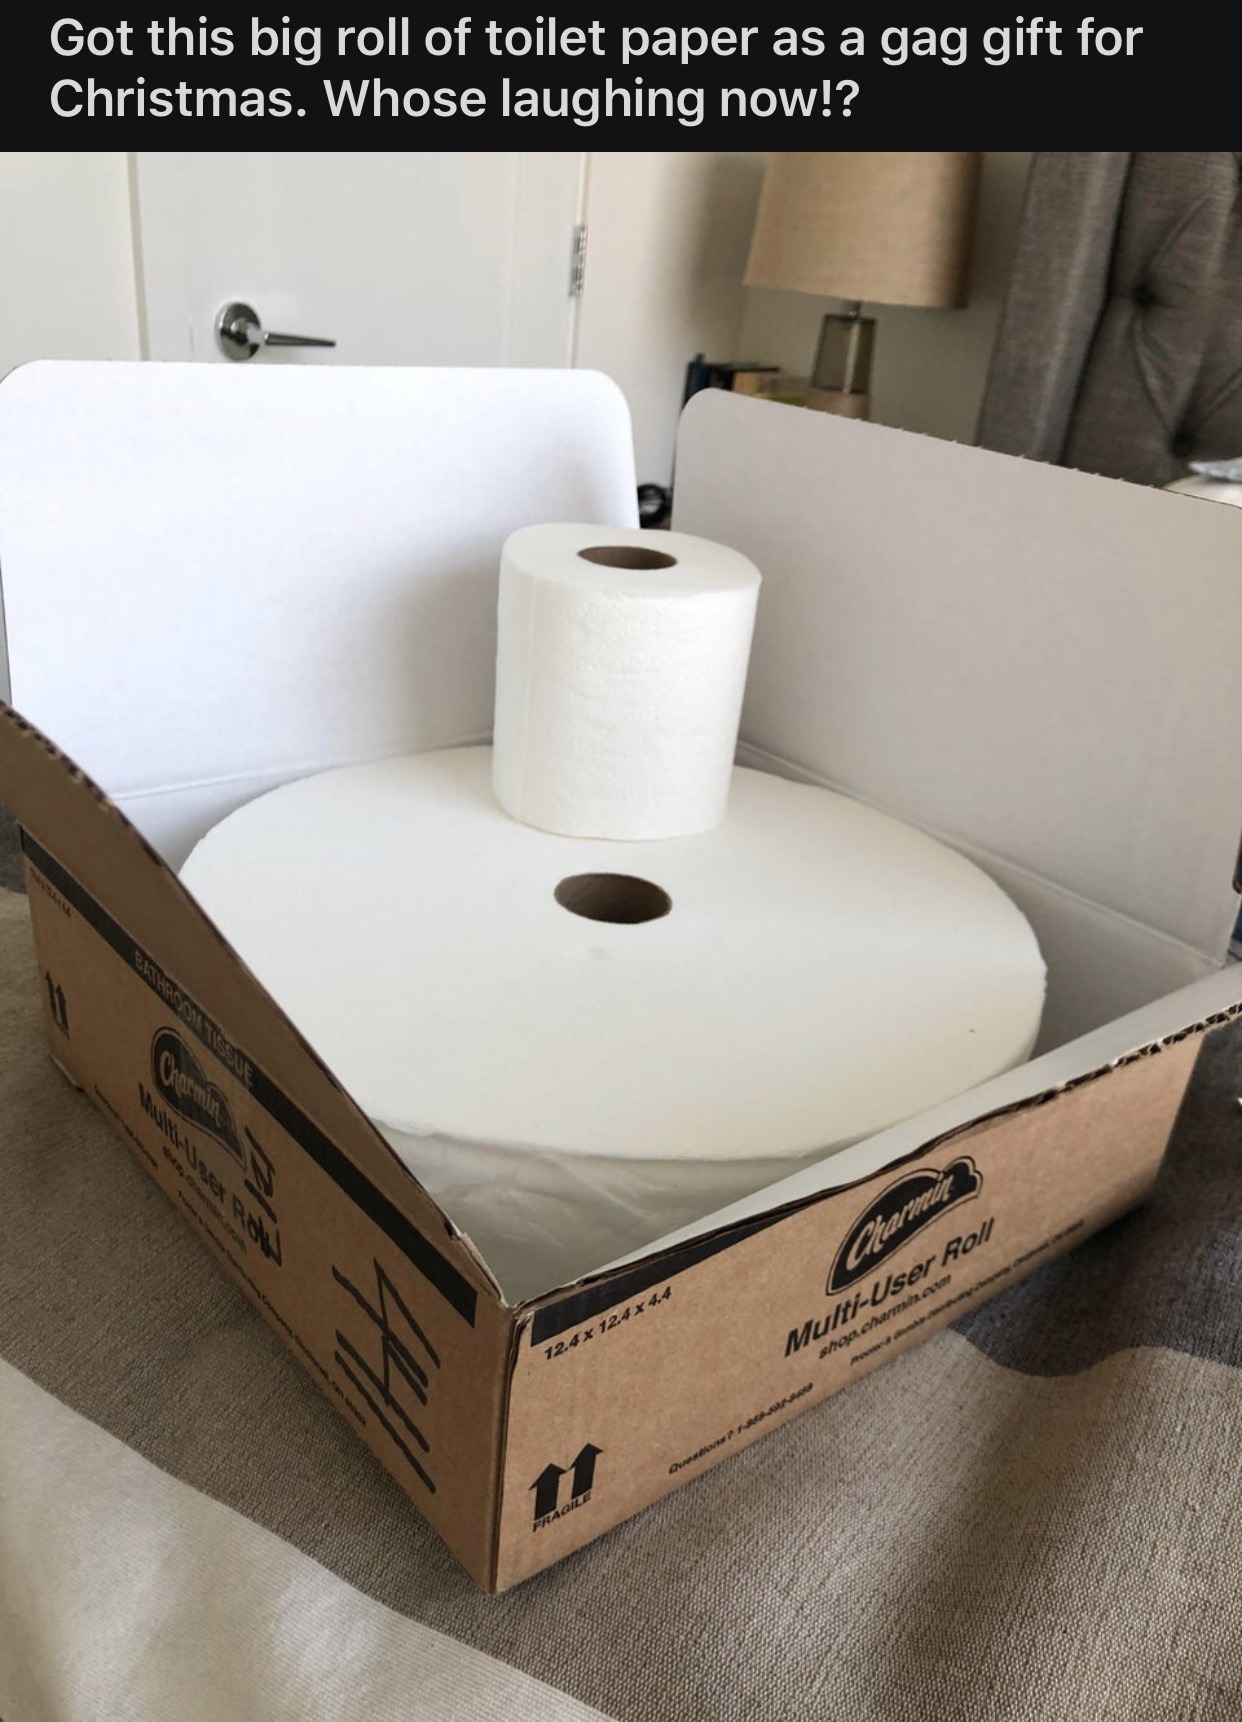 Toilet paper - Got this big roll of toilet paper as a gag gift for Christmas. Whose laughing now!? 12.4 x 124 x 44 MultiUser Roll